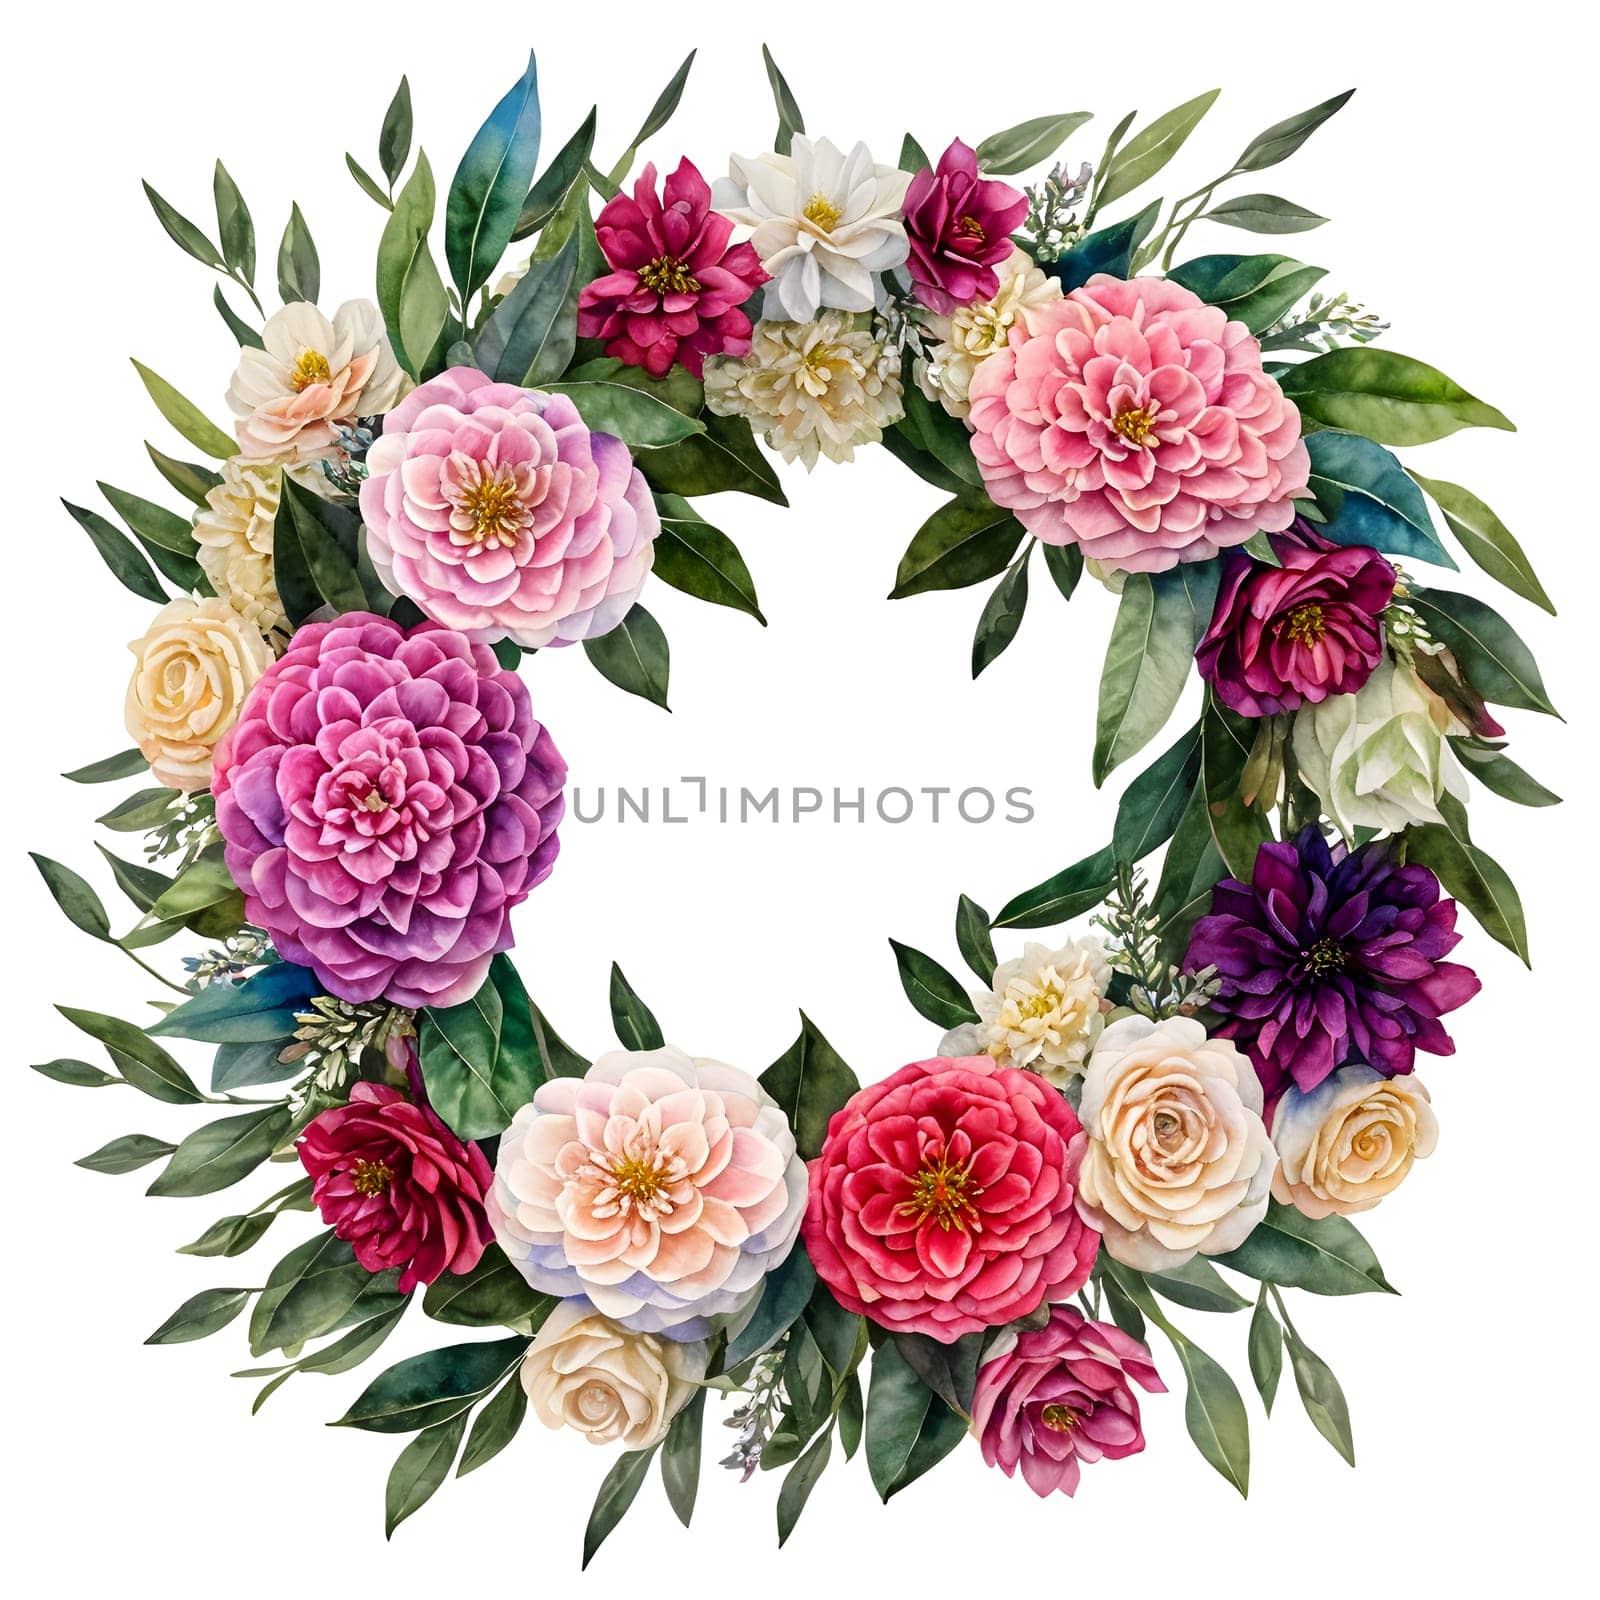 Watercolor Floral Wreath with Pink, White, Purple, Red Flowers and Leaves on White Background. by LanaLeta